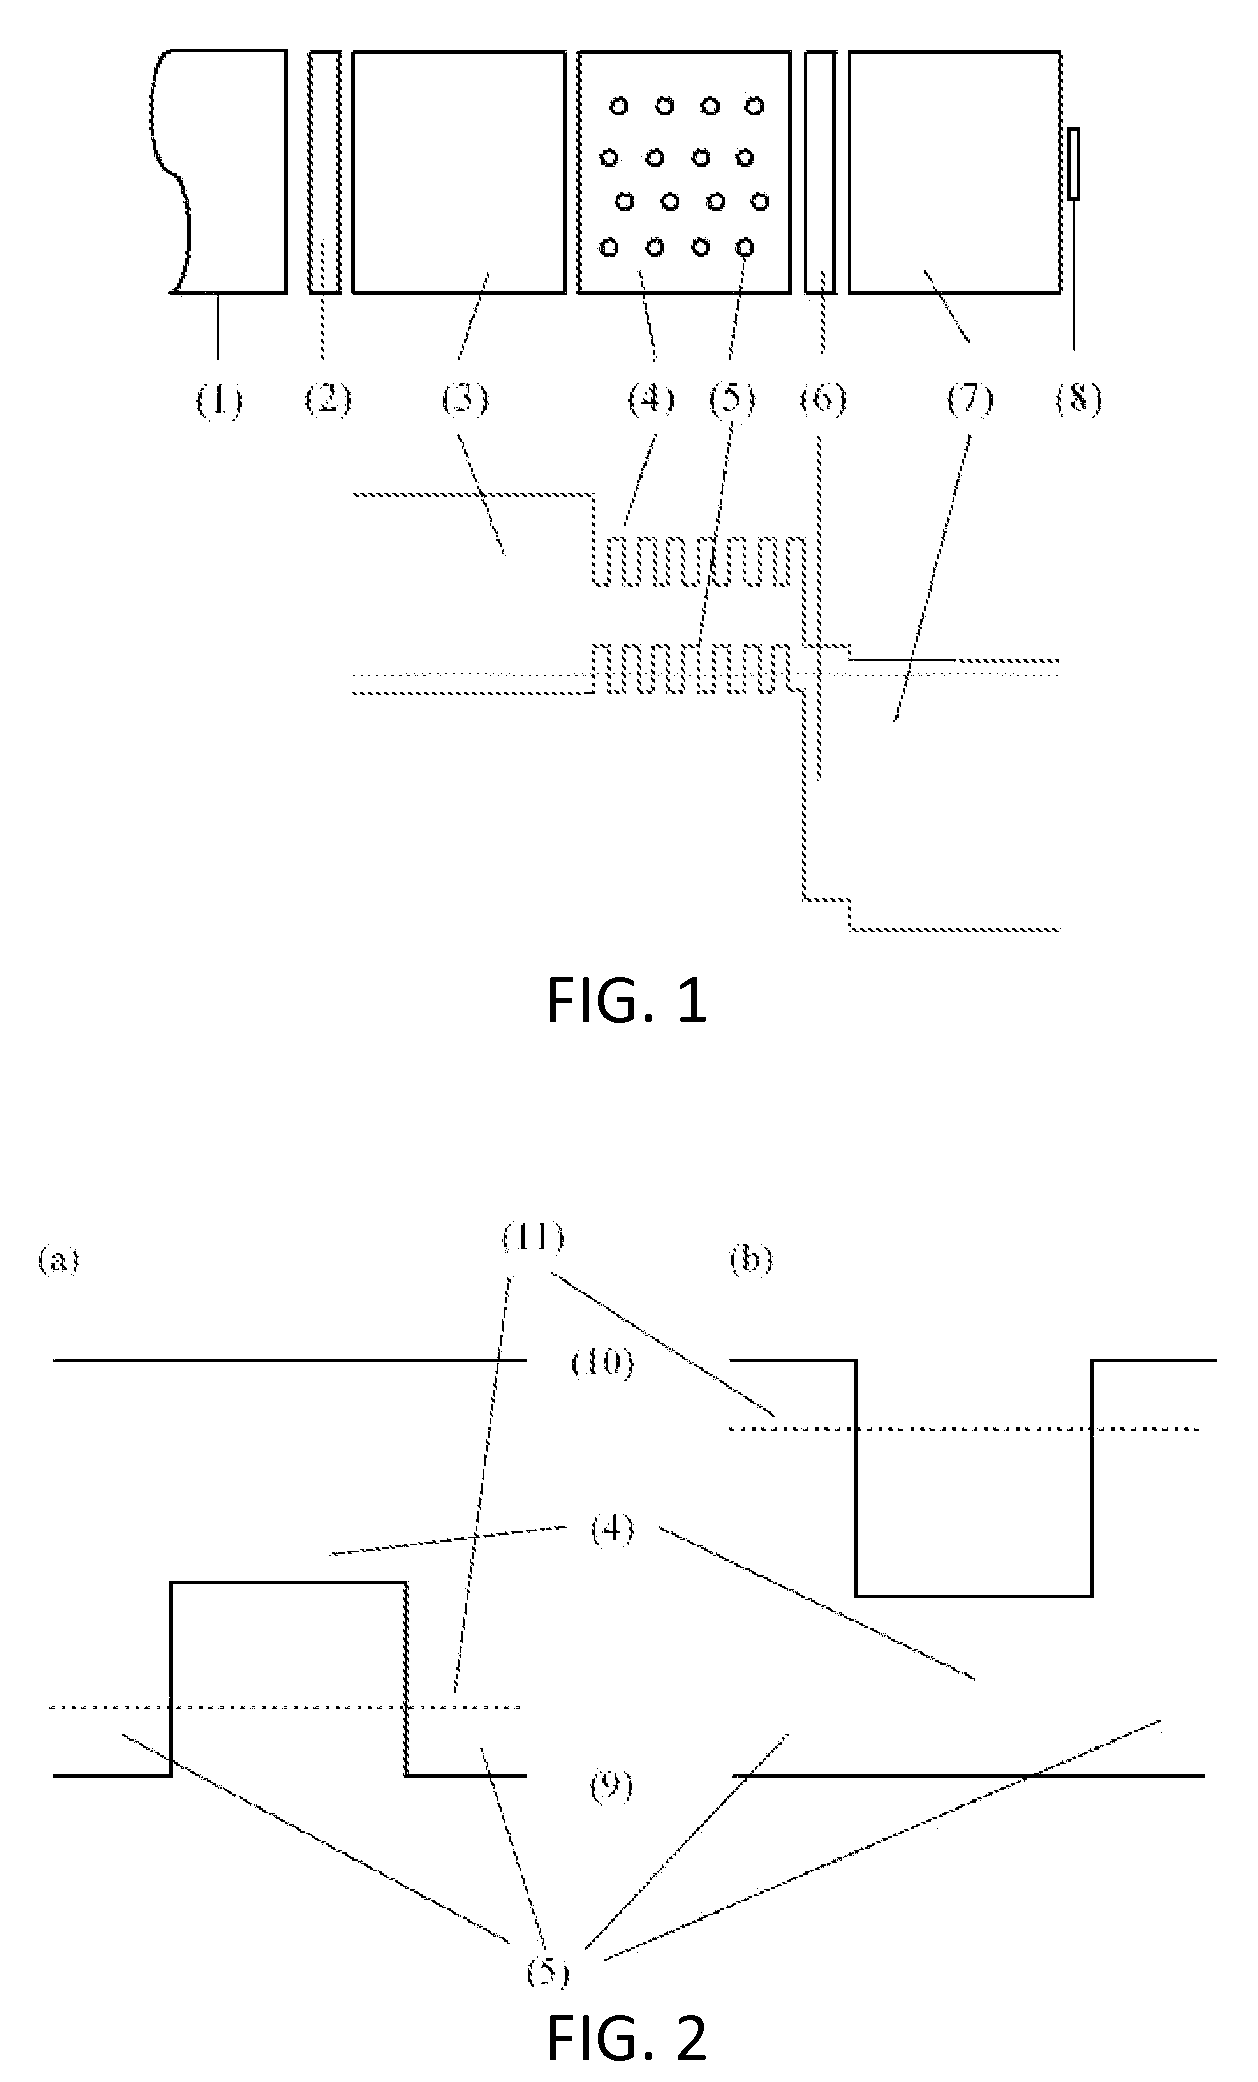 Method for manufacturing of optoelectronic devices based on thin-film, intermediate-band materials description